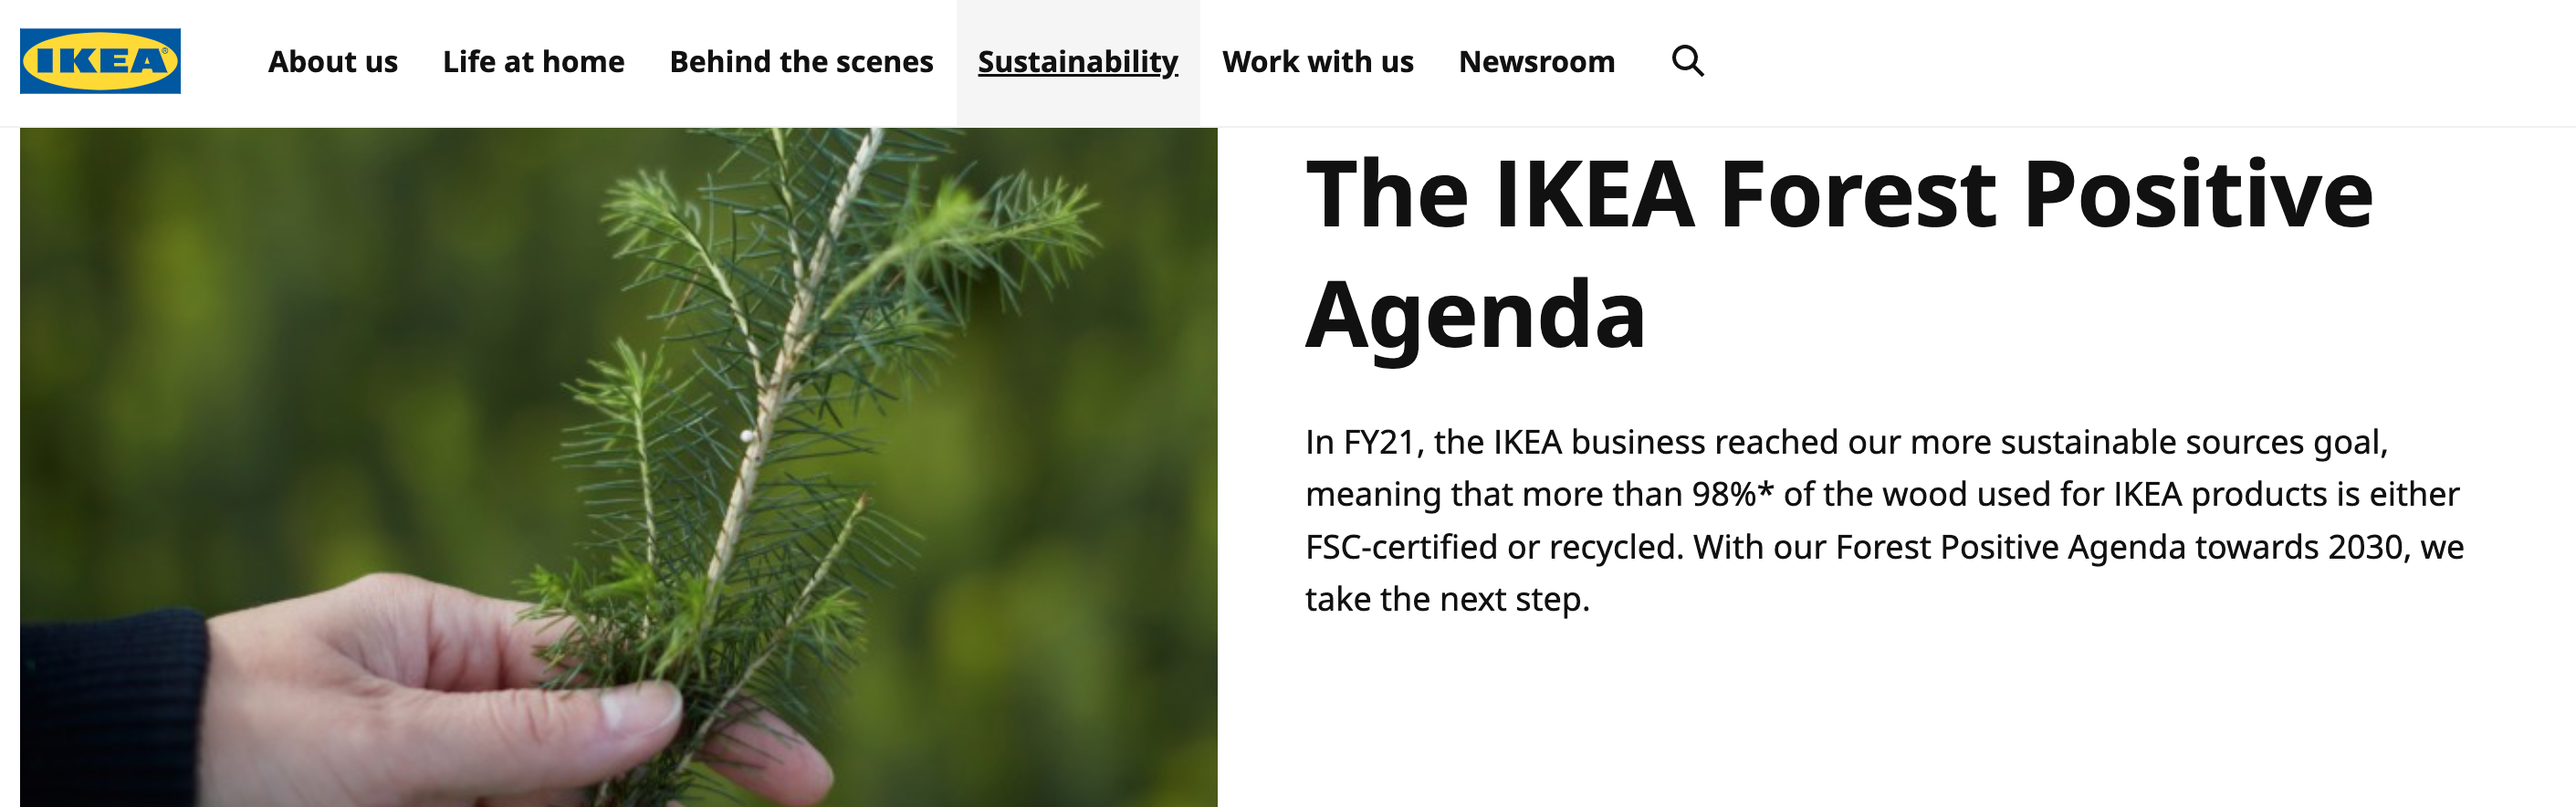 IKEA's forest agenda website page